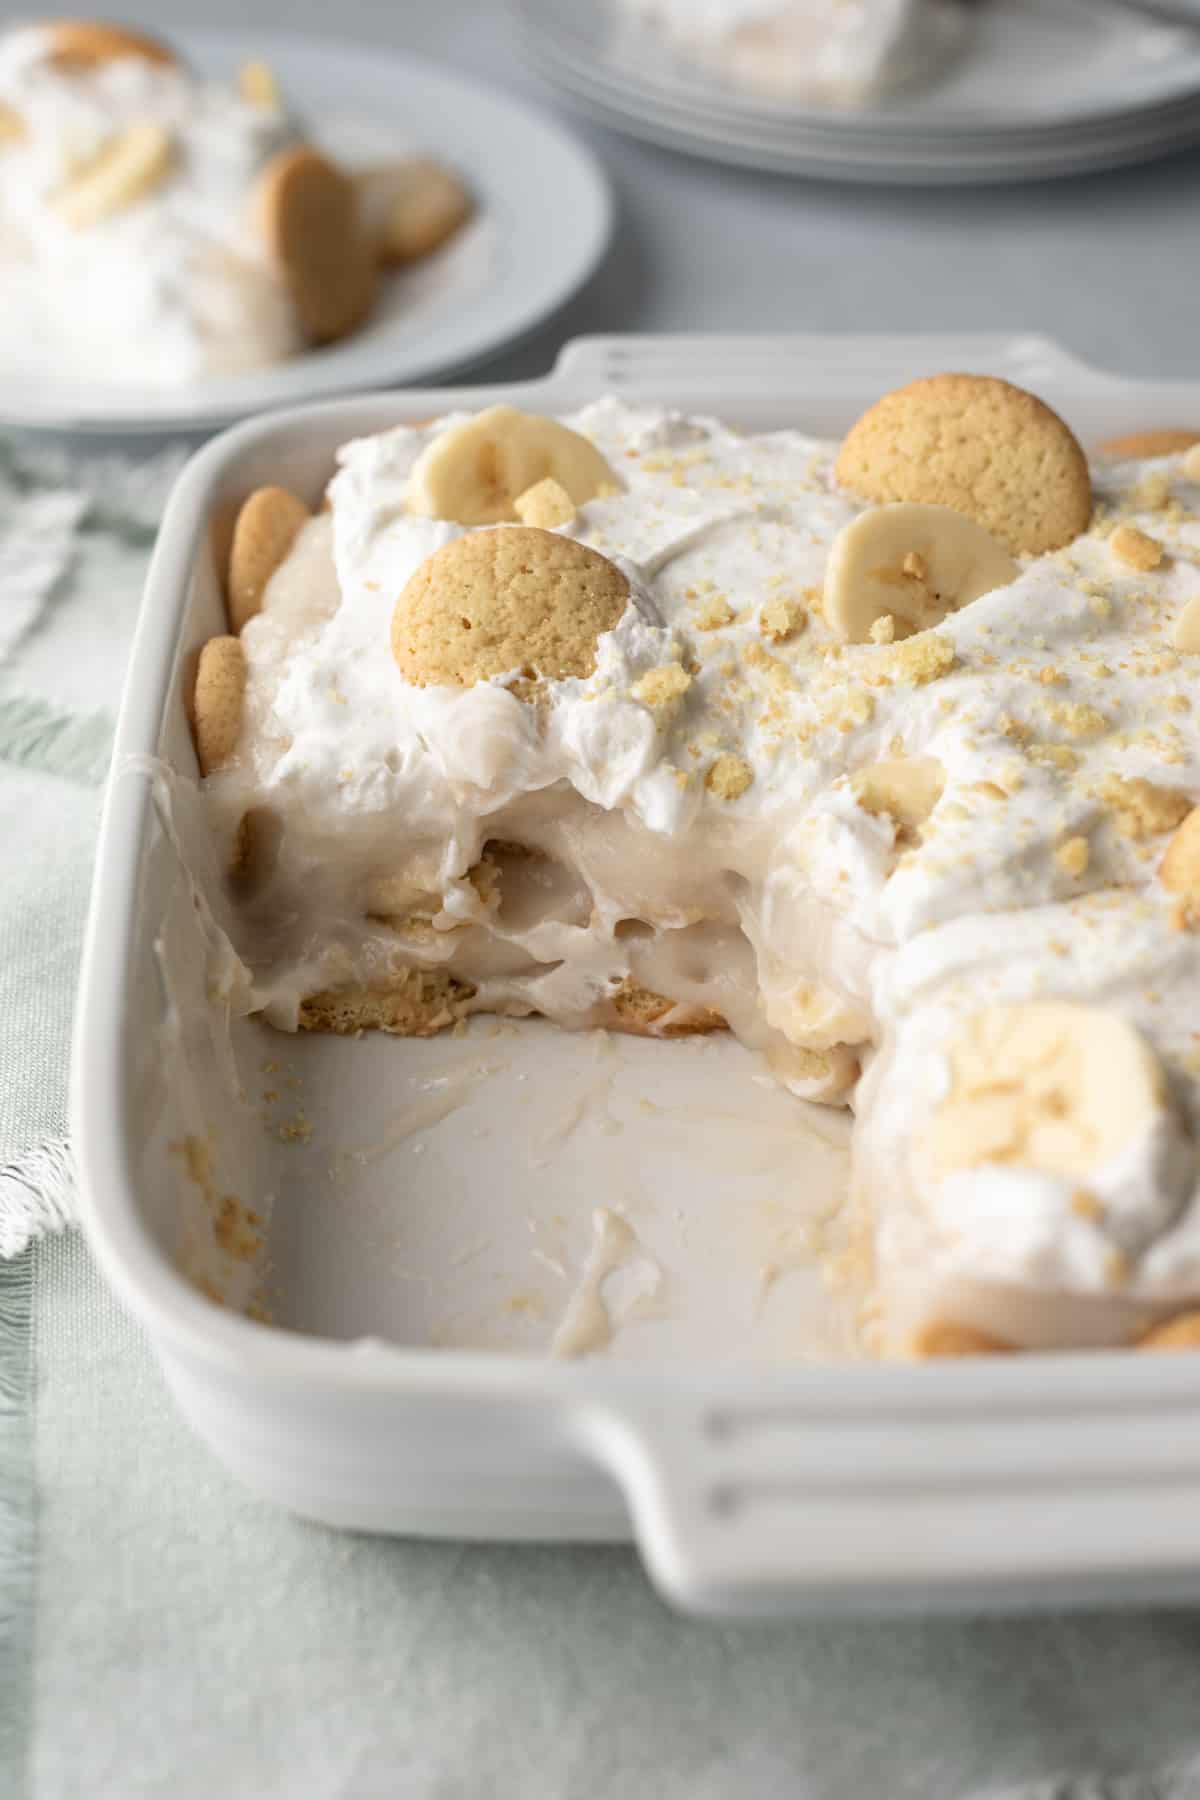 large scoop of banana pudding removed from pan to show inside.